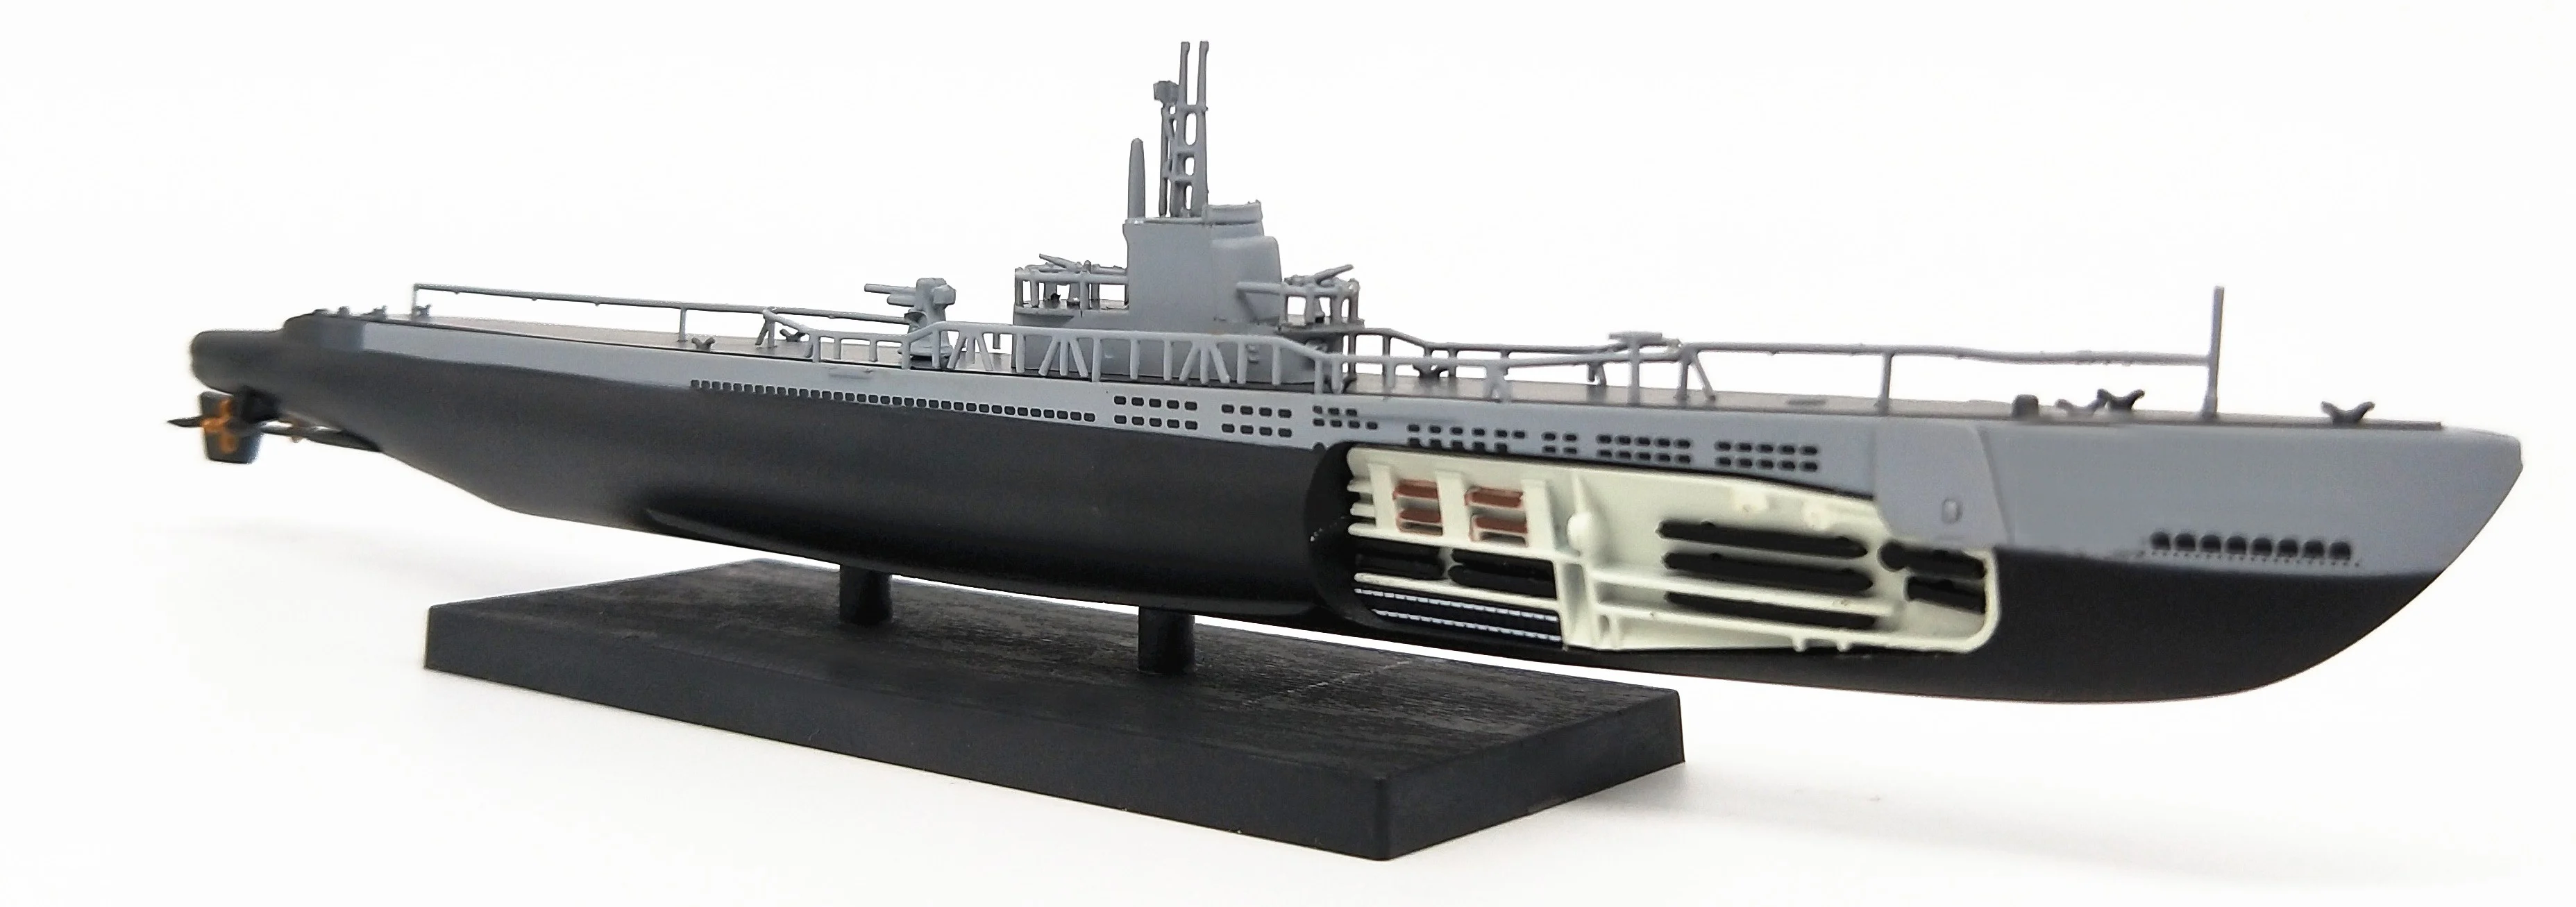 Lllunimon 1/350 USS Barb Submarine Model Alloy Warship Finished Product Collection Ornaments Decoration